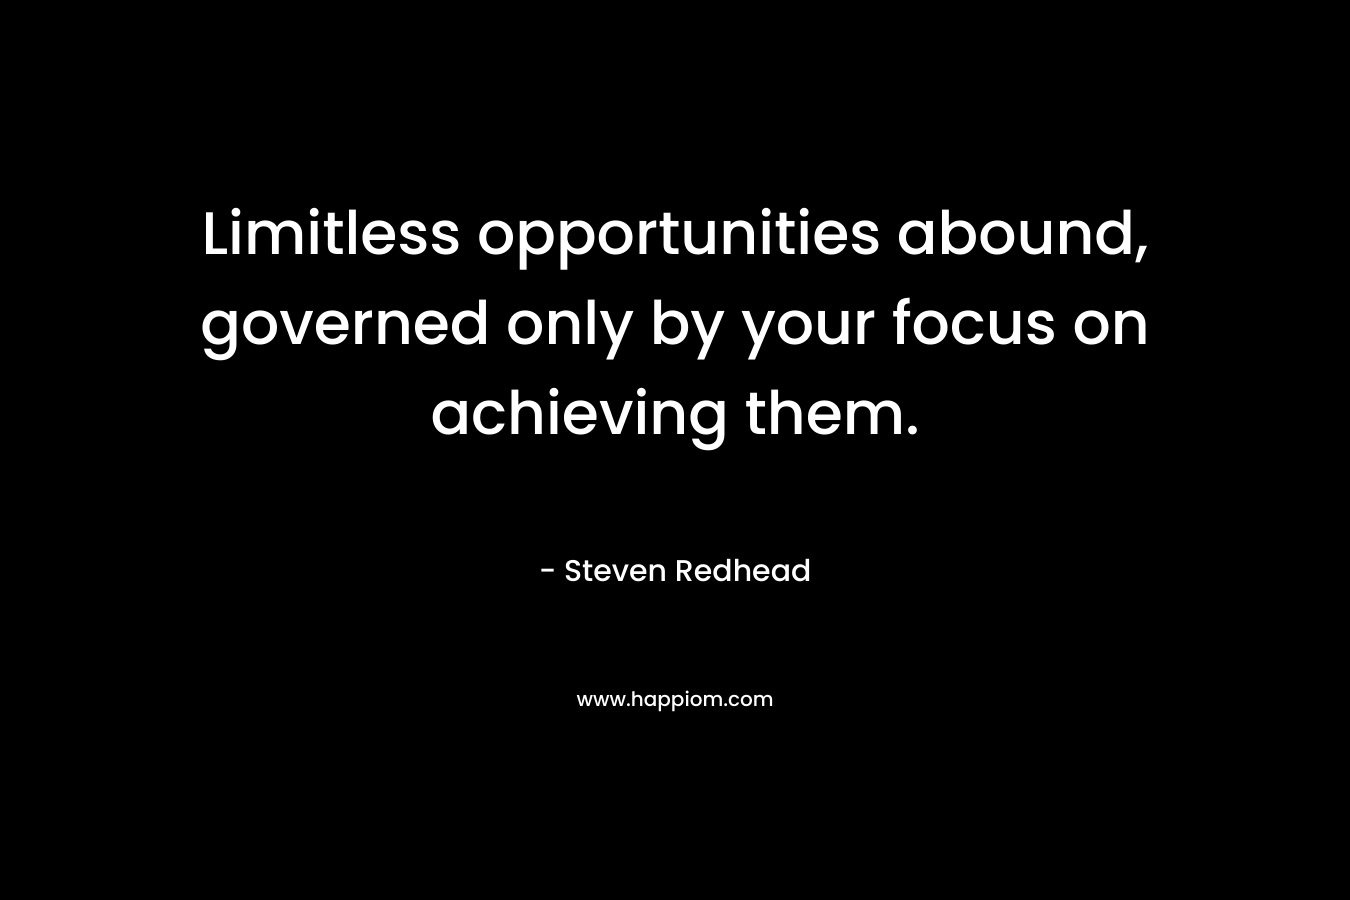 Limitless opportunities abound, governed only by your focus on achieving them. – Steven Redhead